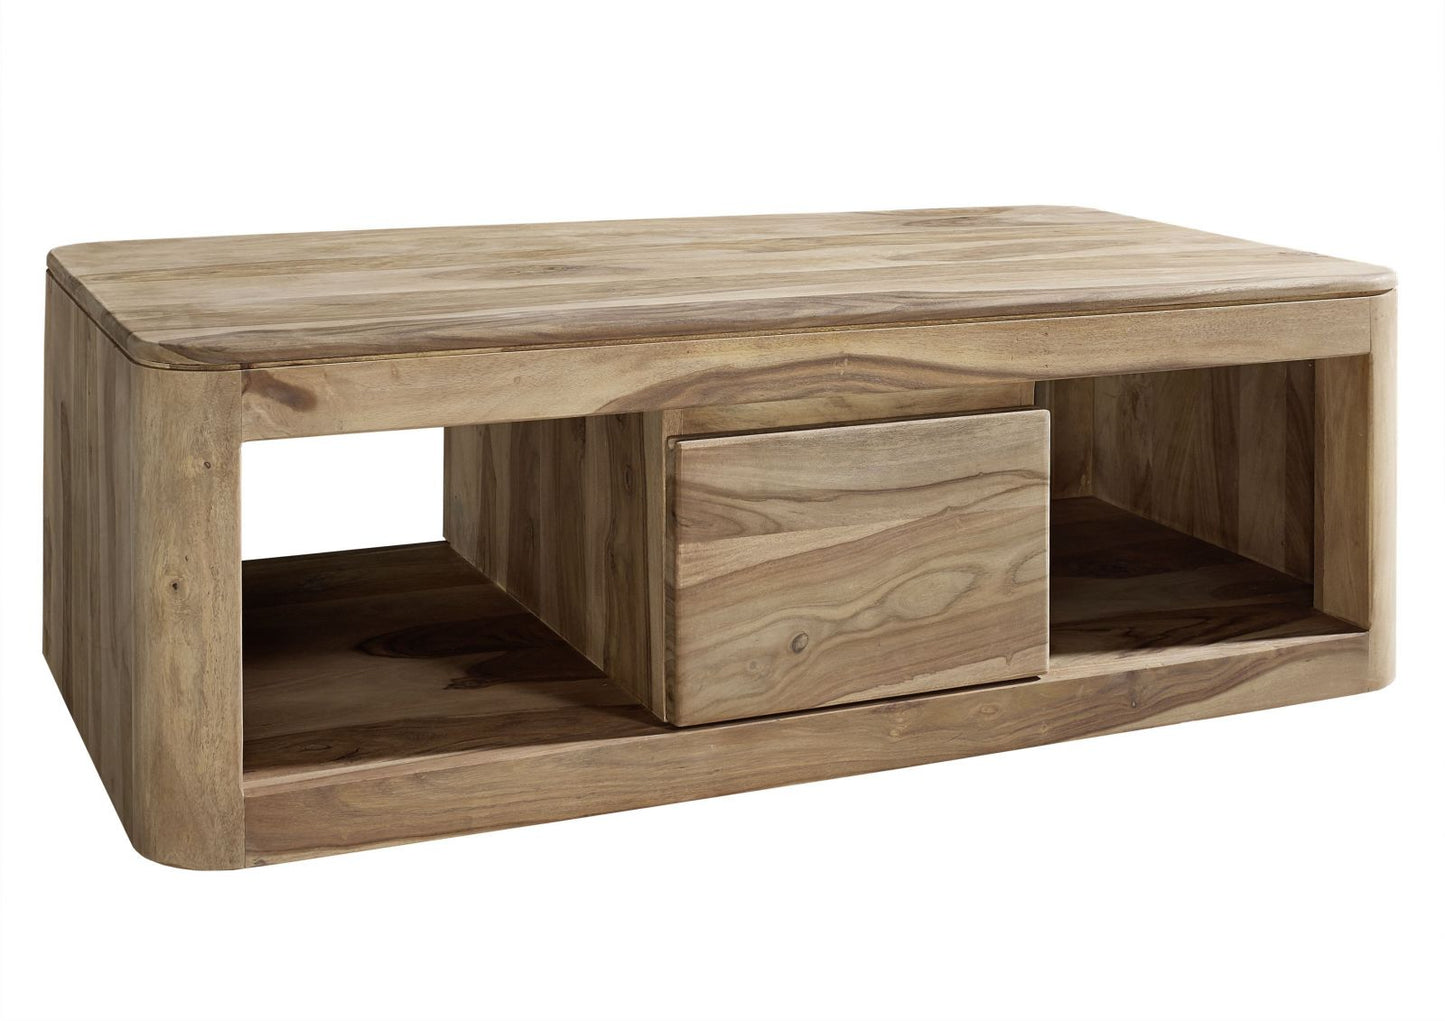 Coffee table with two drawers made of solid sheesham wood